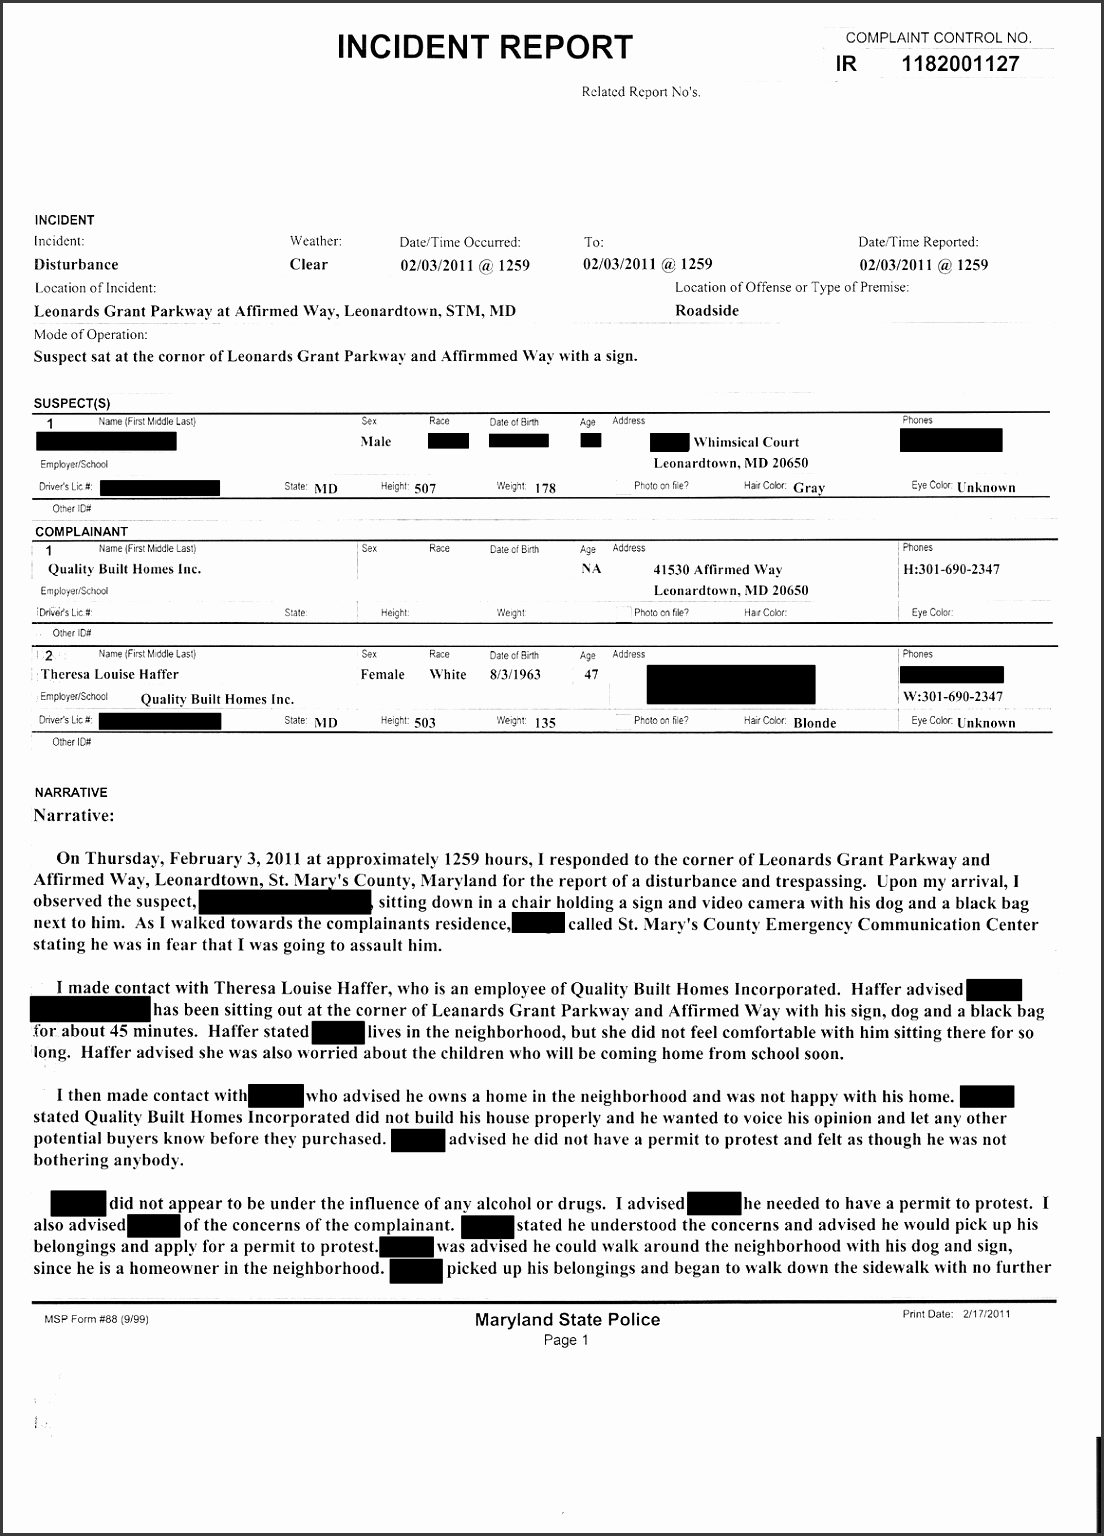 6 Blank Police Report Template